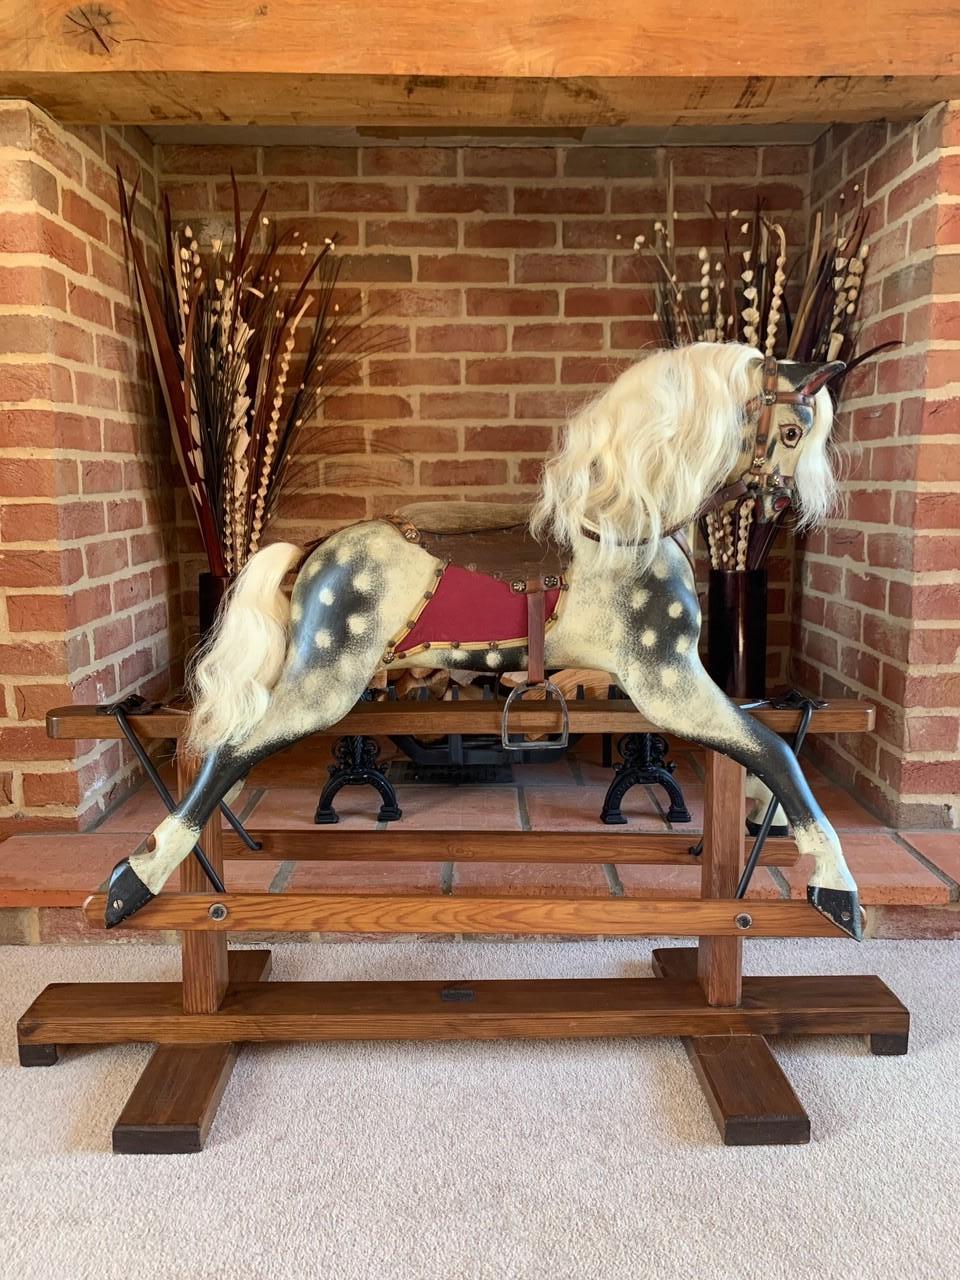 Molly
Baby Carriages ‘RAMBLER’
 

Molly is a Baby Carriages ‘Rambler’ rocking horse on a safety stand, circa 1930. She is in excellent mostly original condition and has just had her paintwork retouched where necessary by professional restorer